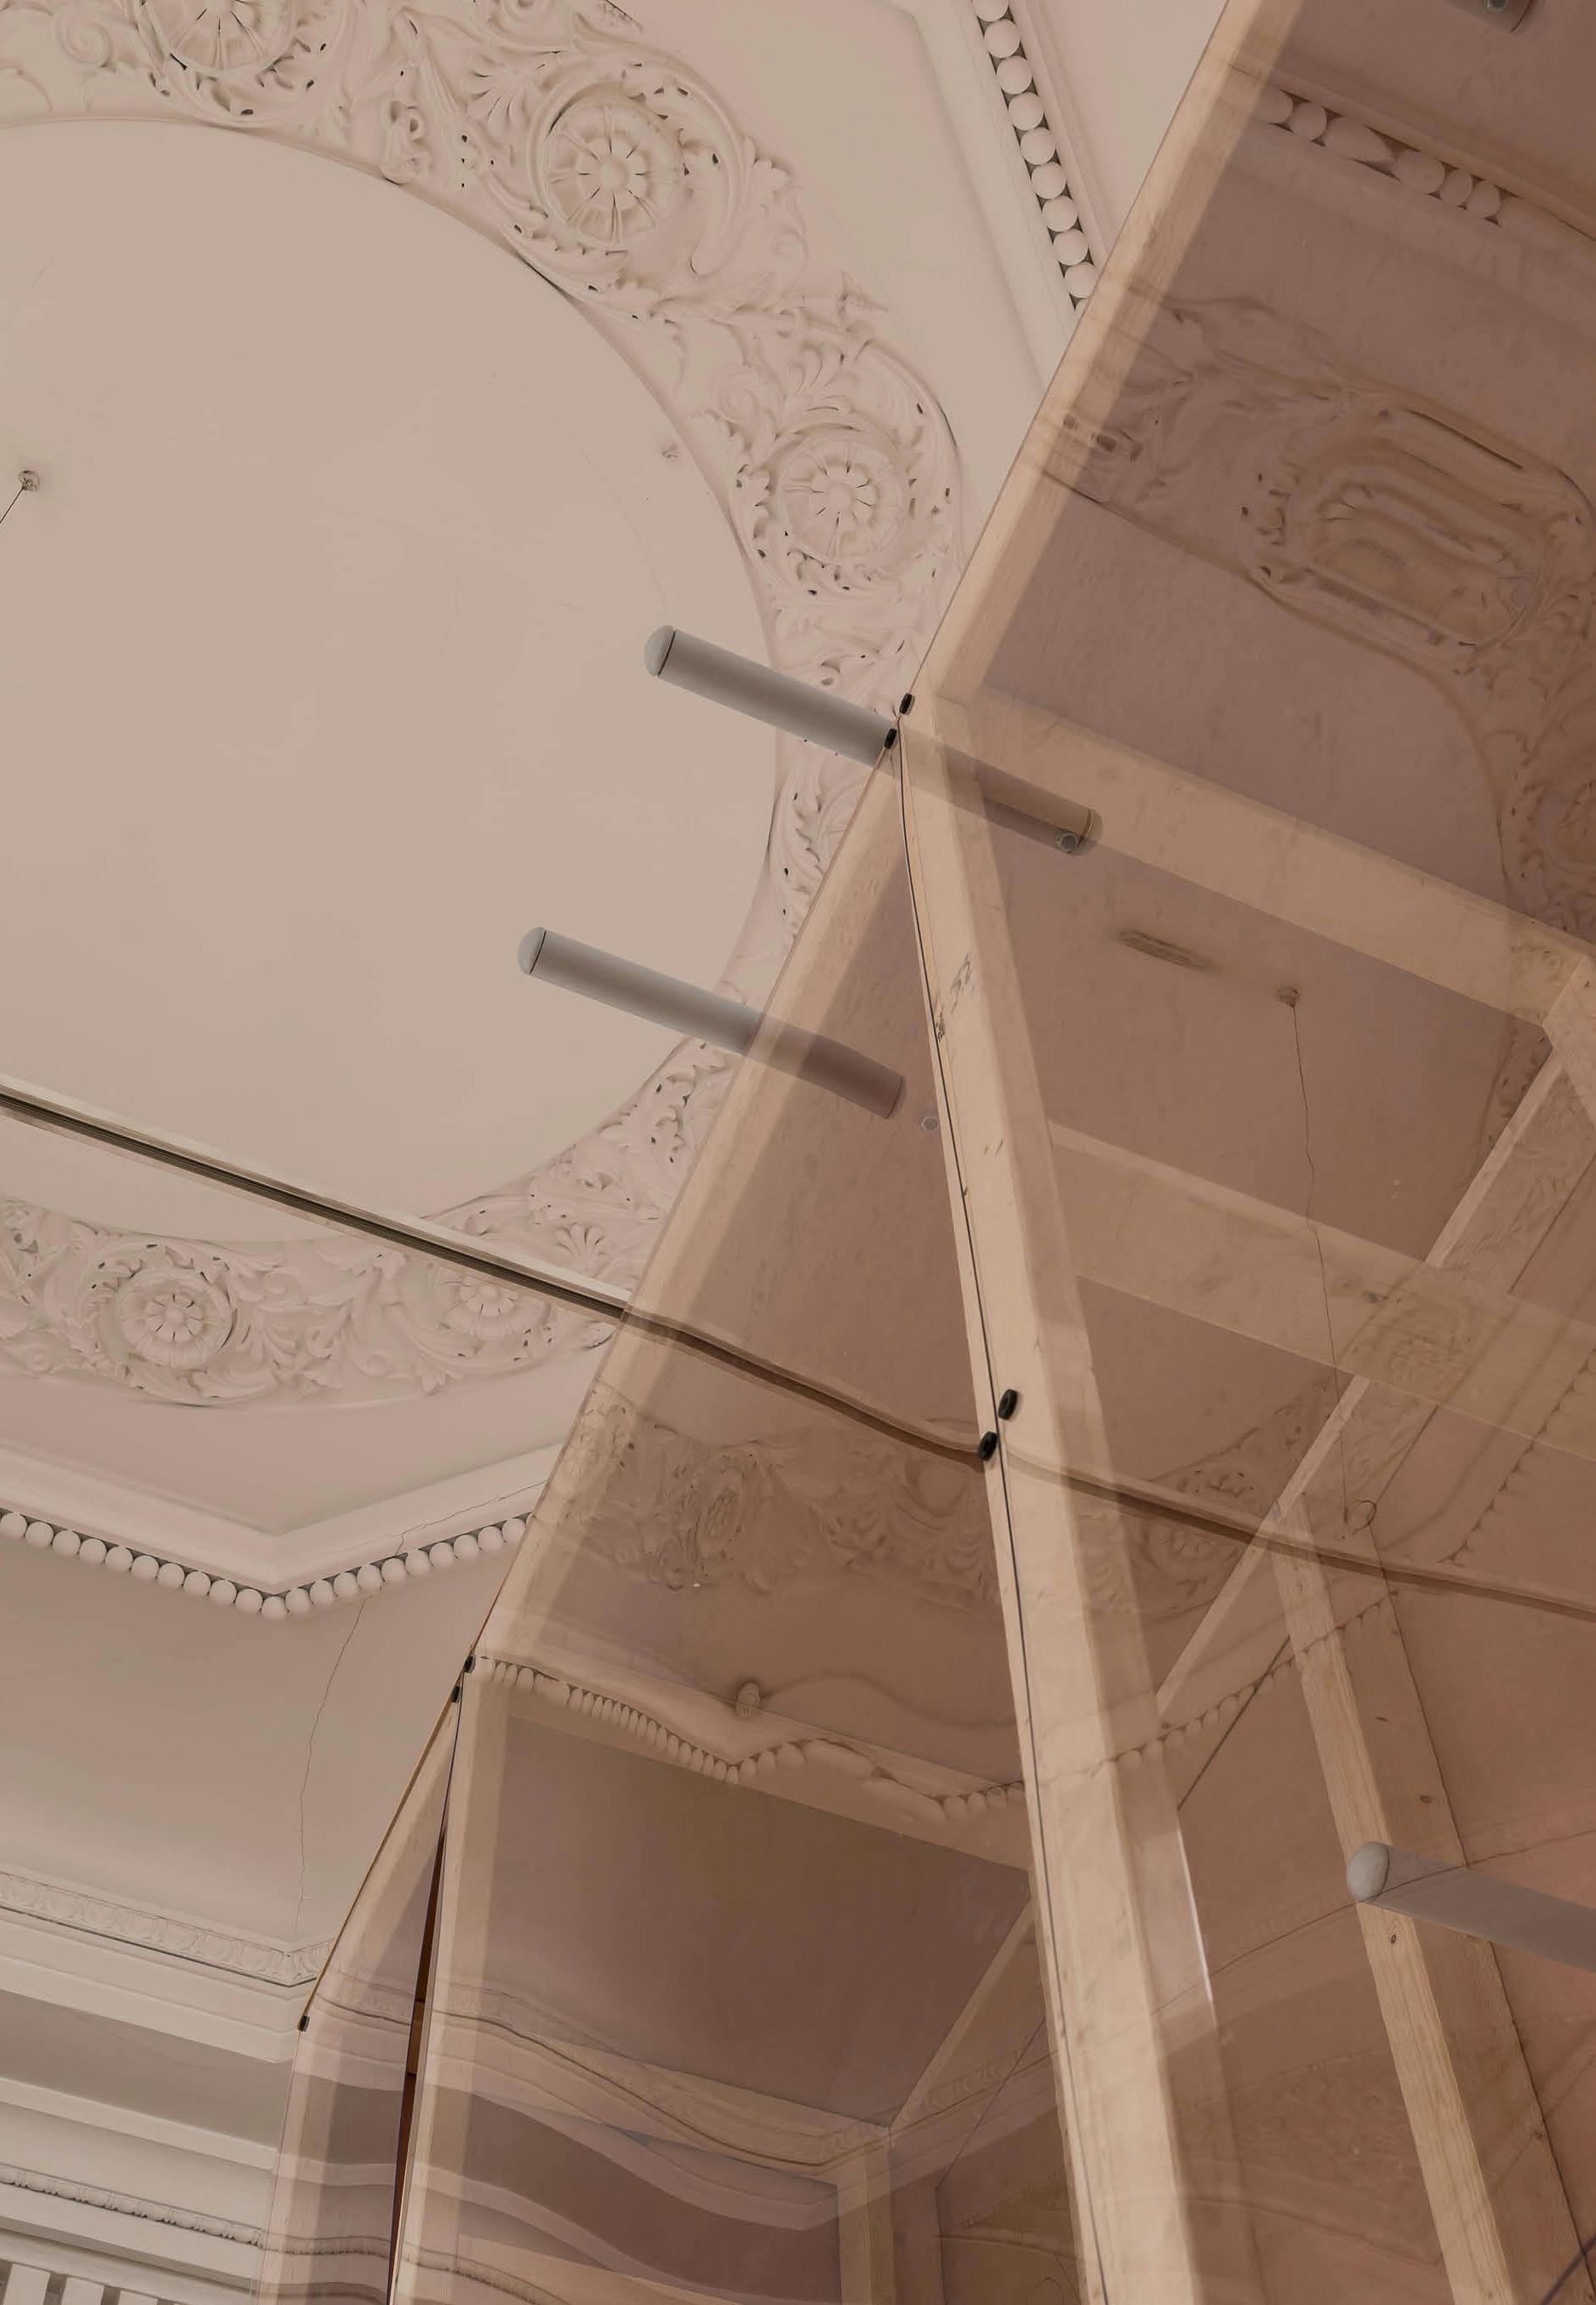 'Ornament, Work'  by Henry Coleman,  produced for the Royal Academy Premiums exhibition, intricate decorated ceiling of 6 Burlington gardens  reflected in a Perspex cladding mounted on a  timber structure